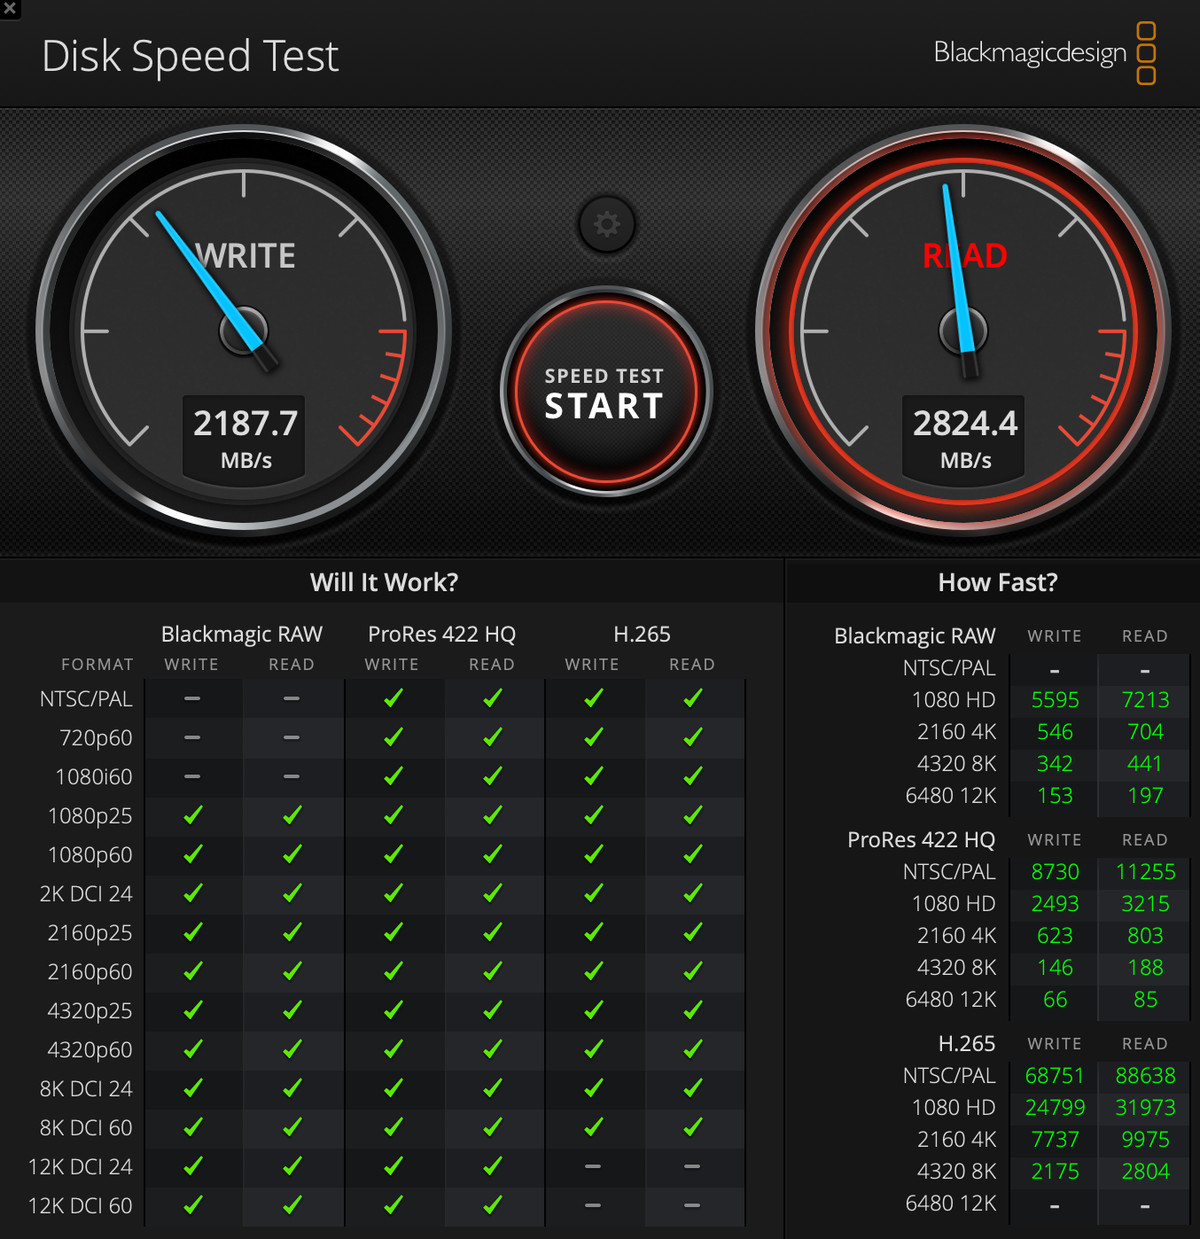 A screenshot of the Blackmagic Disk Speed ​​Test indicating scores of 2187.7 for writing and 2824.4 for reading.